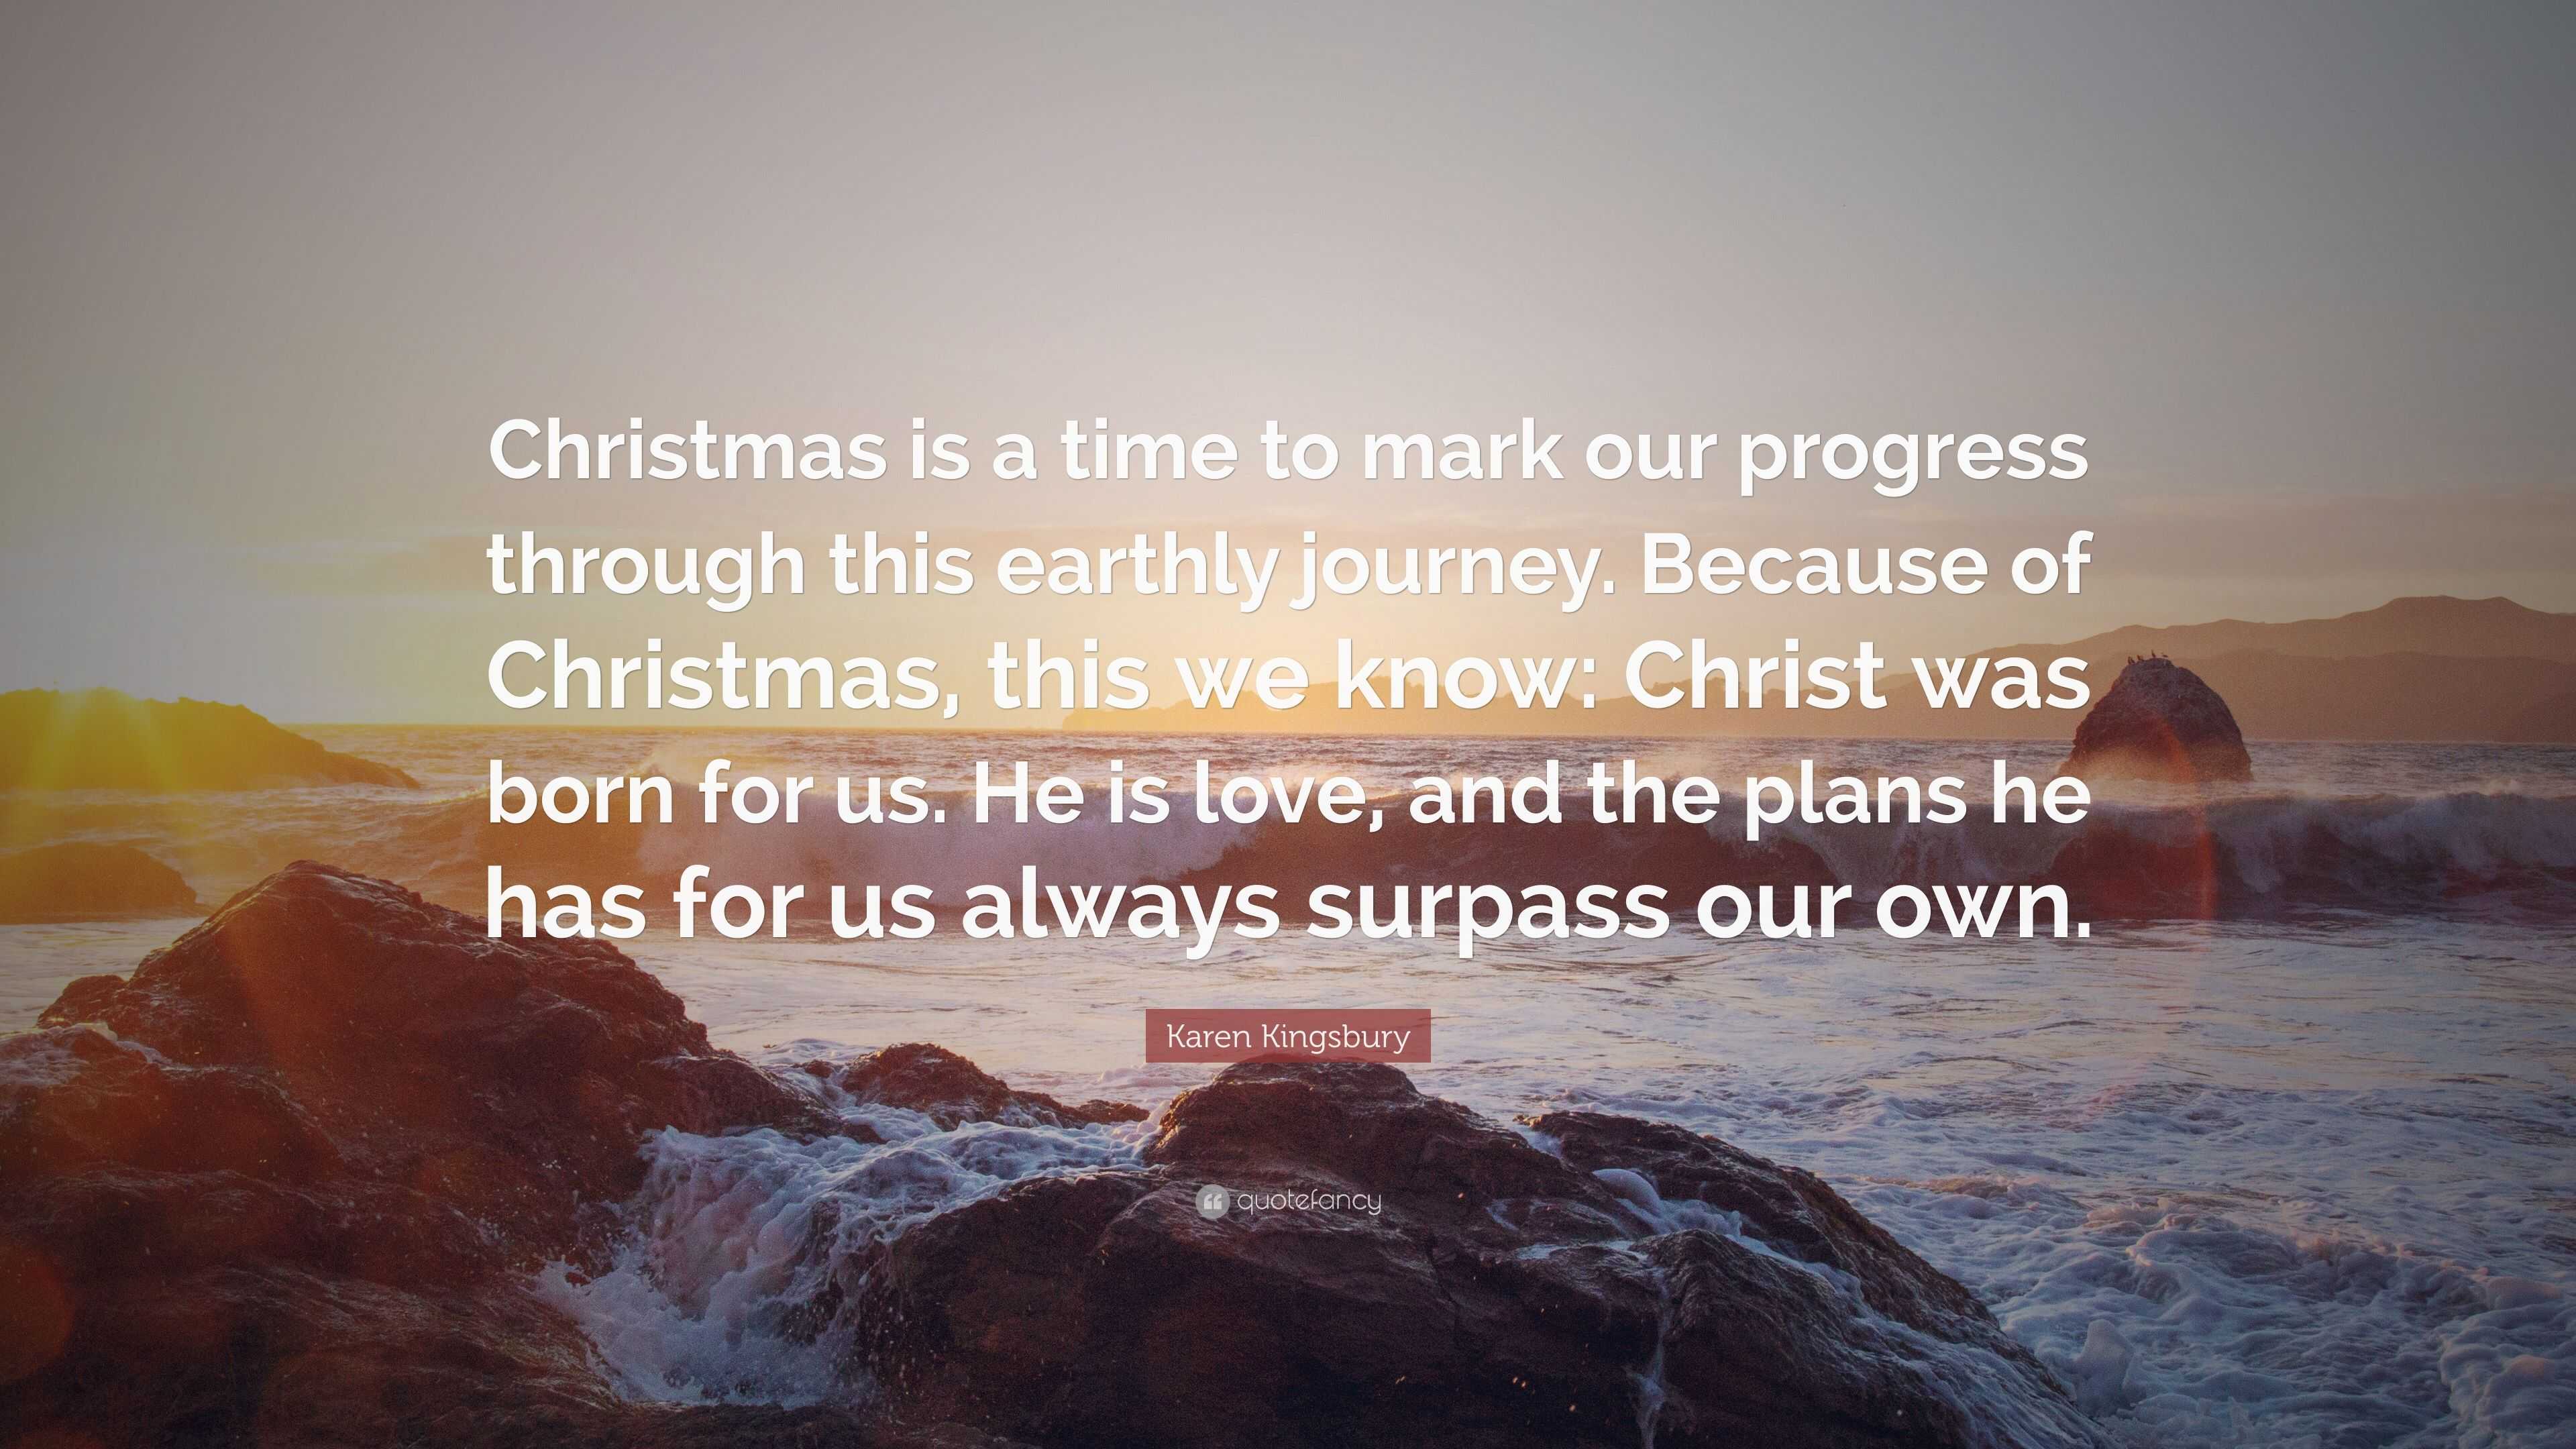 Karen Kingsbury Quote “Christmas is a time to mark our progress through this earthly